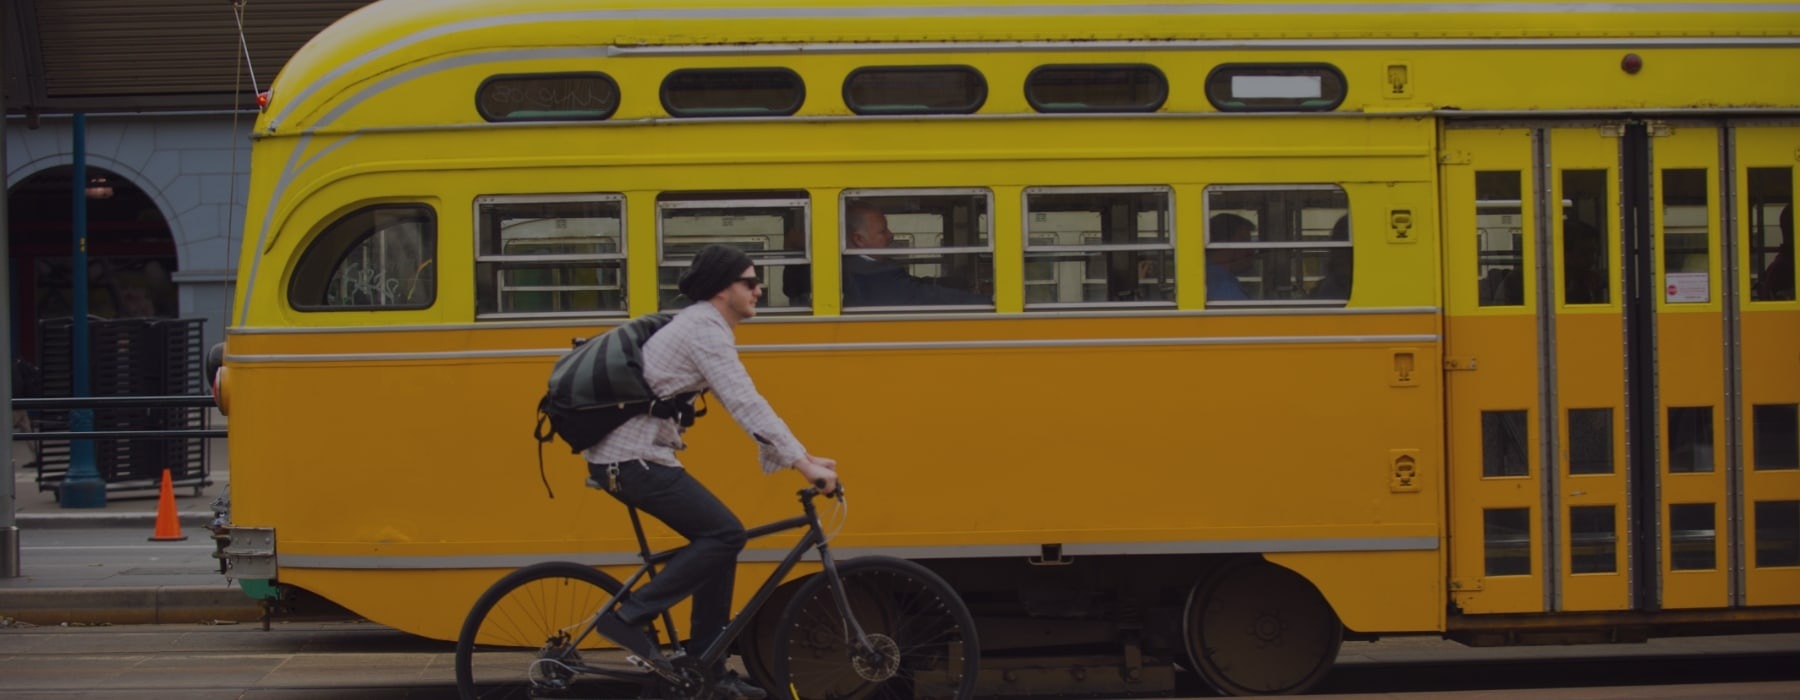 lifestyle image of a person riding their bicycle in front of passing metro bus